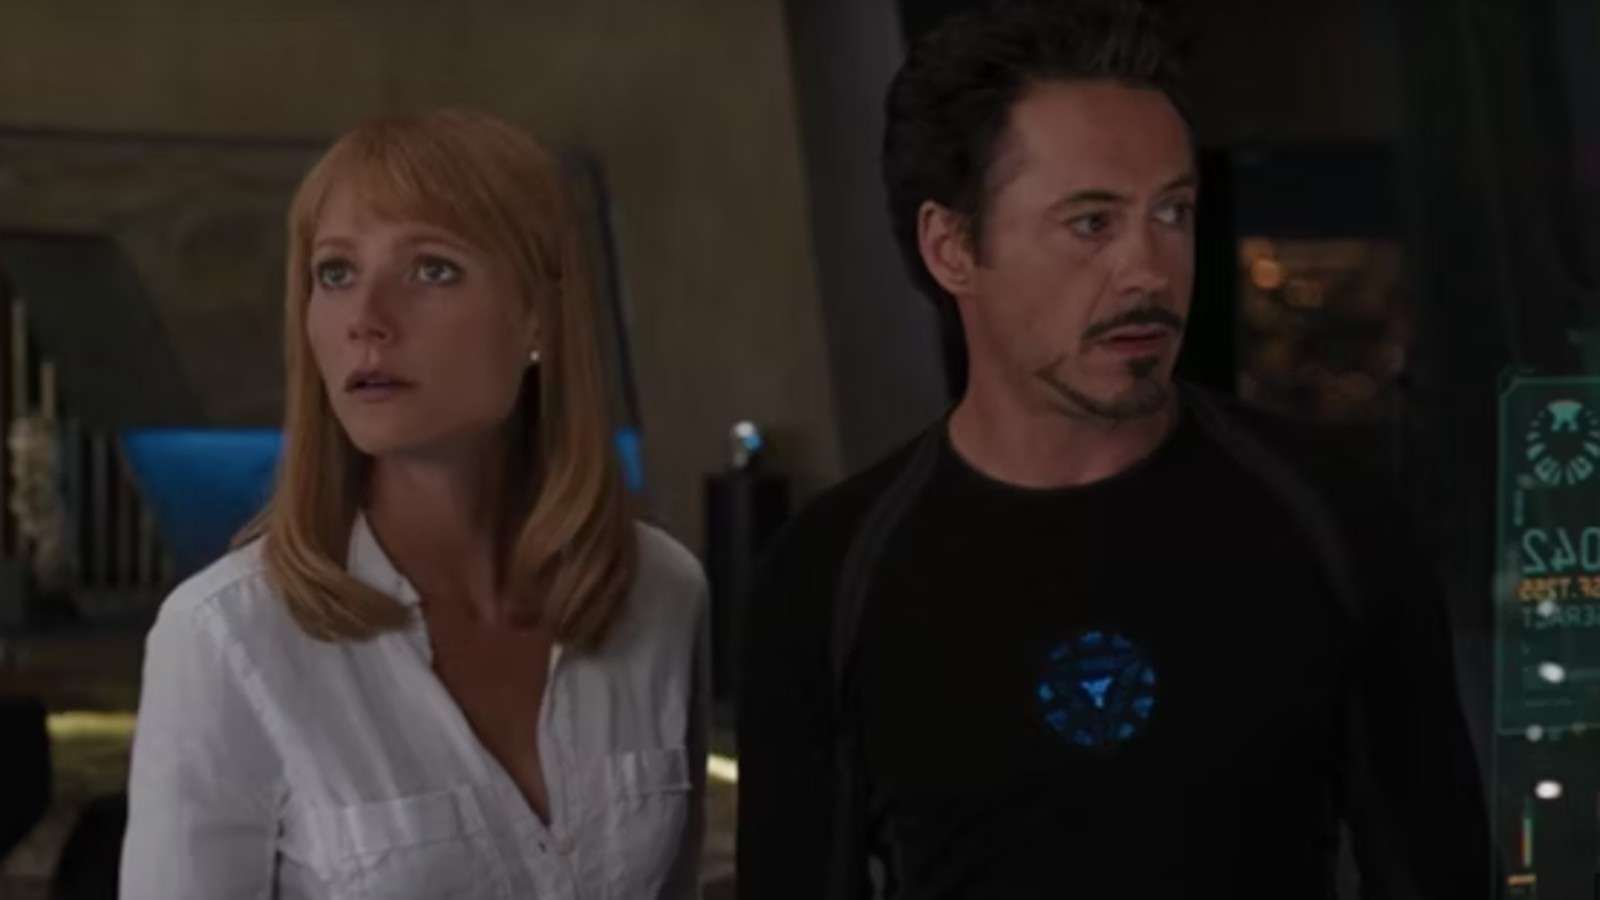 Gwyneth Paltrow and Robert Downey Jr. in The Avengers